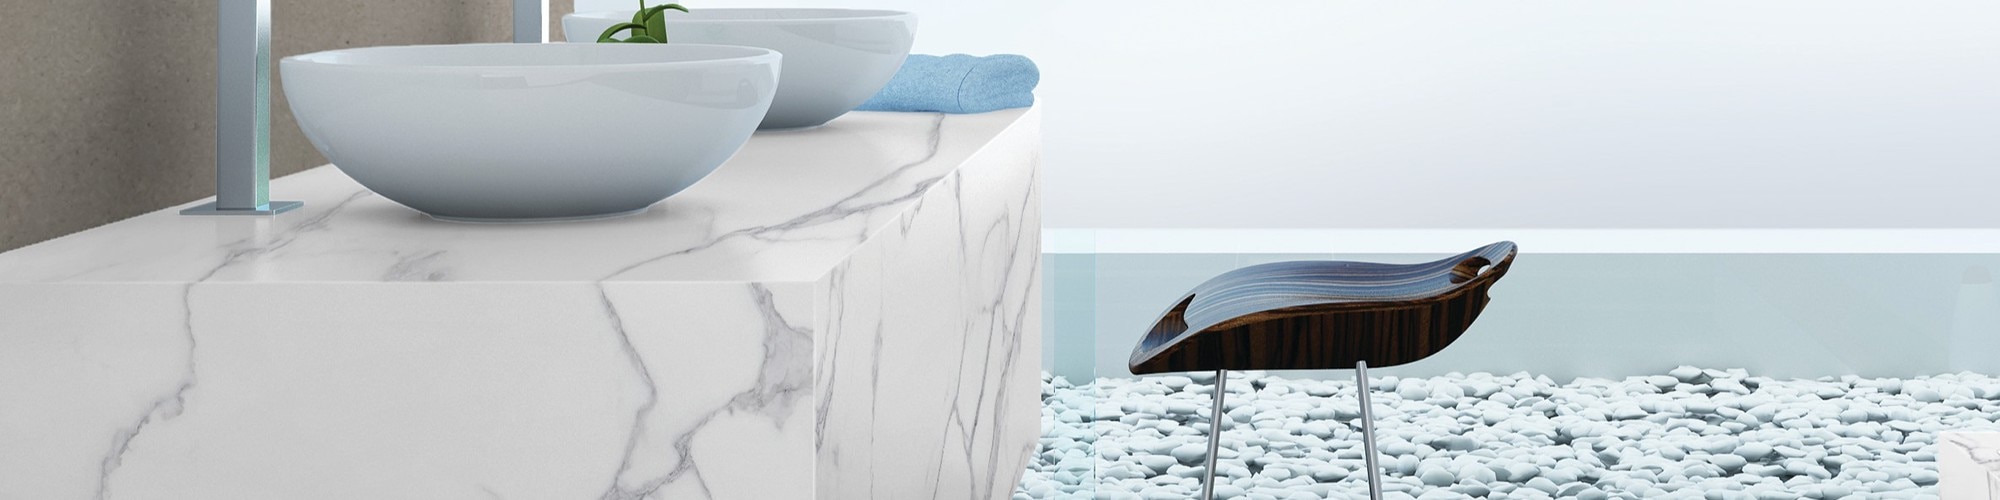 Bathroom with floating vanity made of white & gray marble look porcelain slab, dual white vessel sinks, small black vanity chair, and light blue flooring.